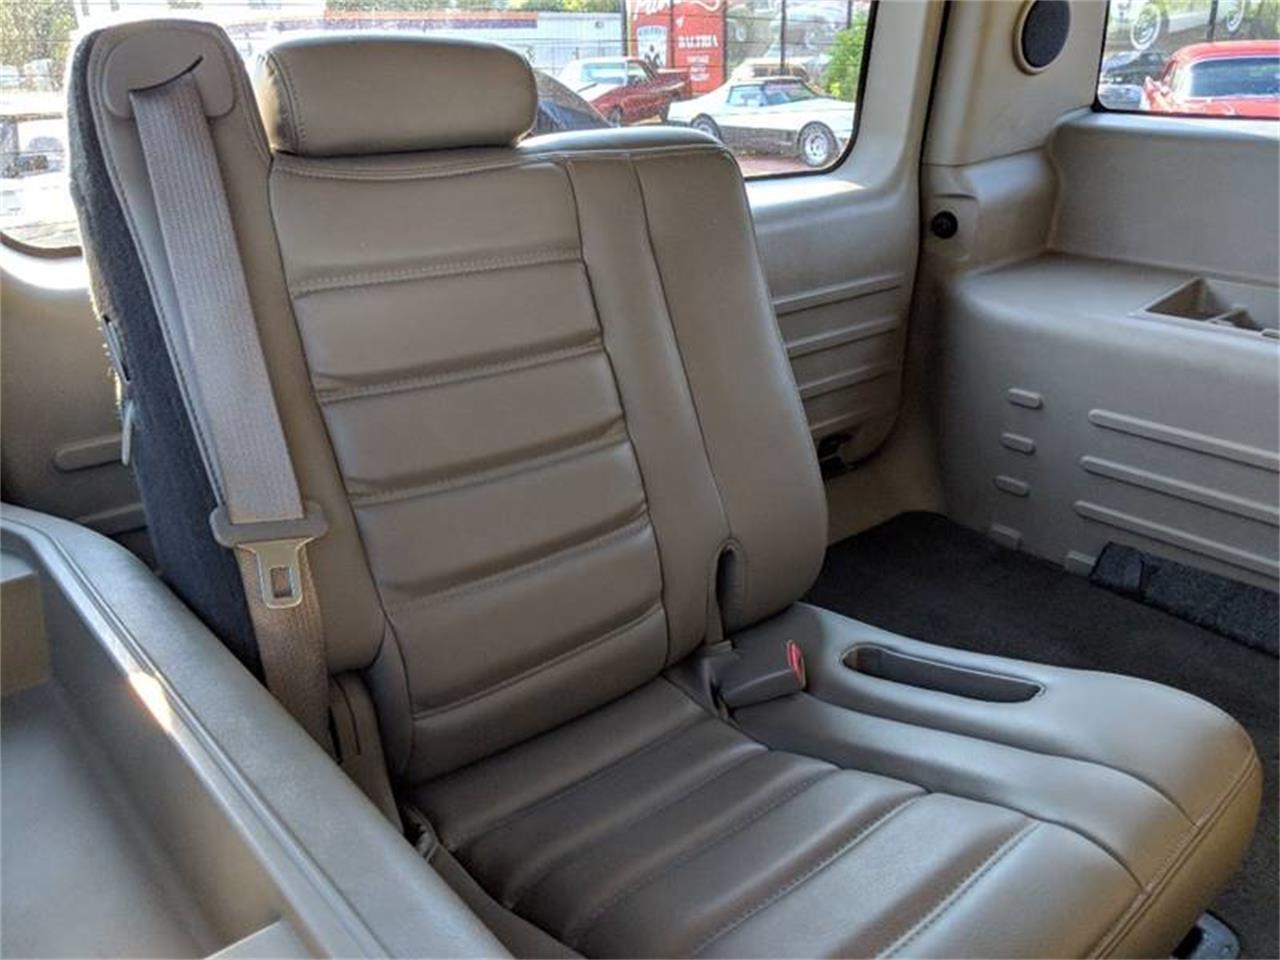 2004 Hummer H2 for sale in St. Charles, IL – photo 22